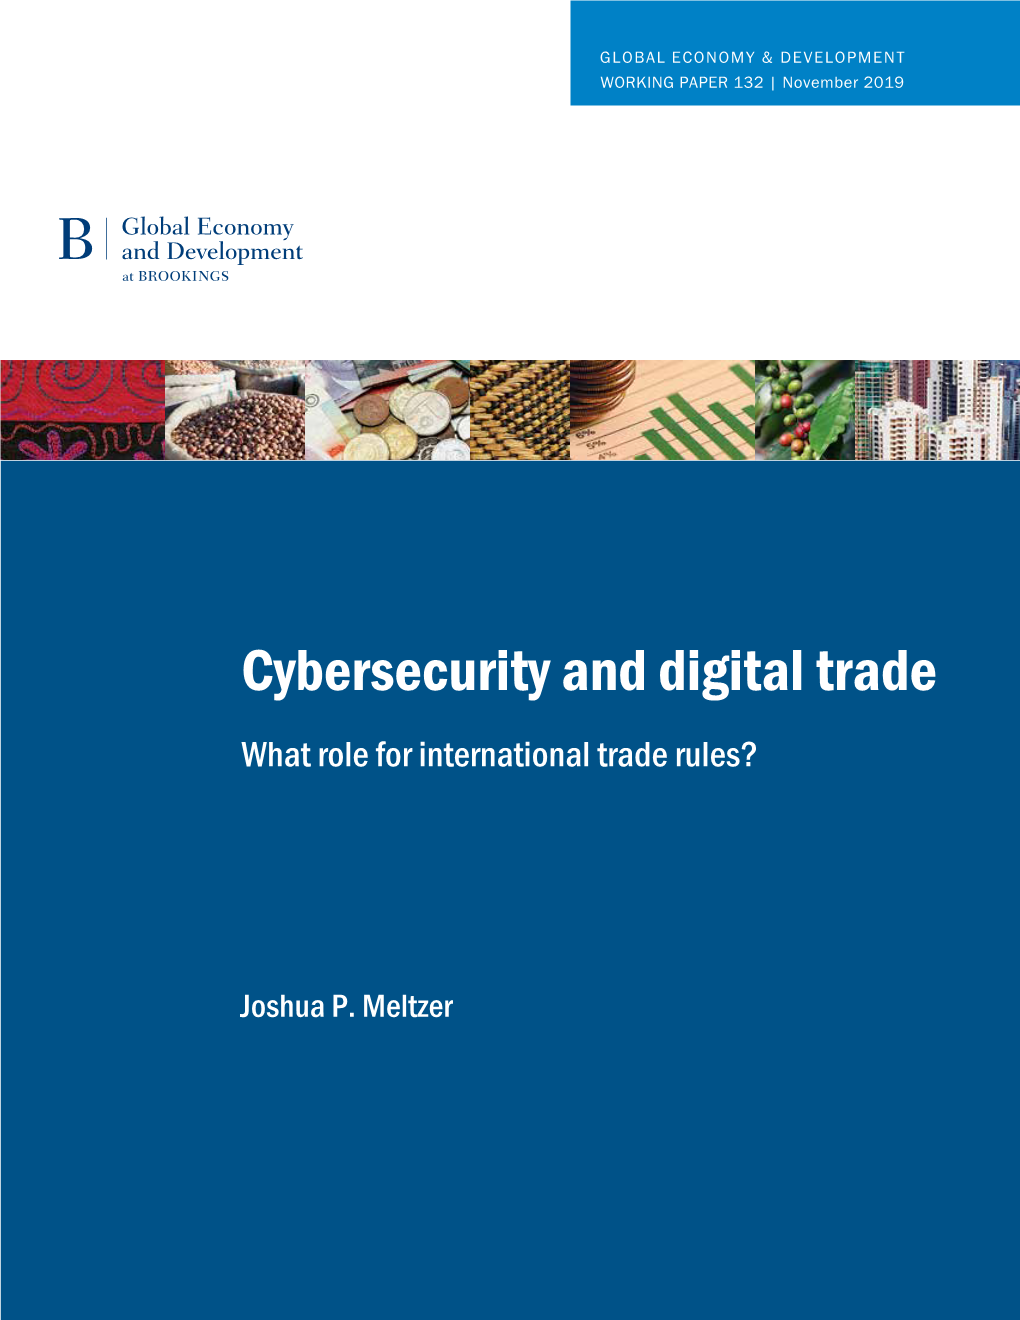 Cybersecurity and Digital Trade What Role for International Trade Rules?